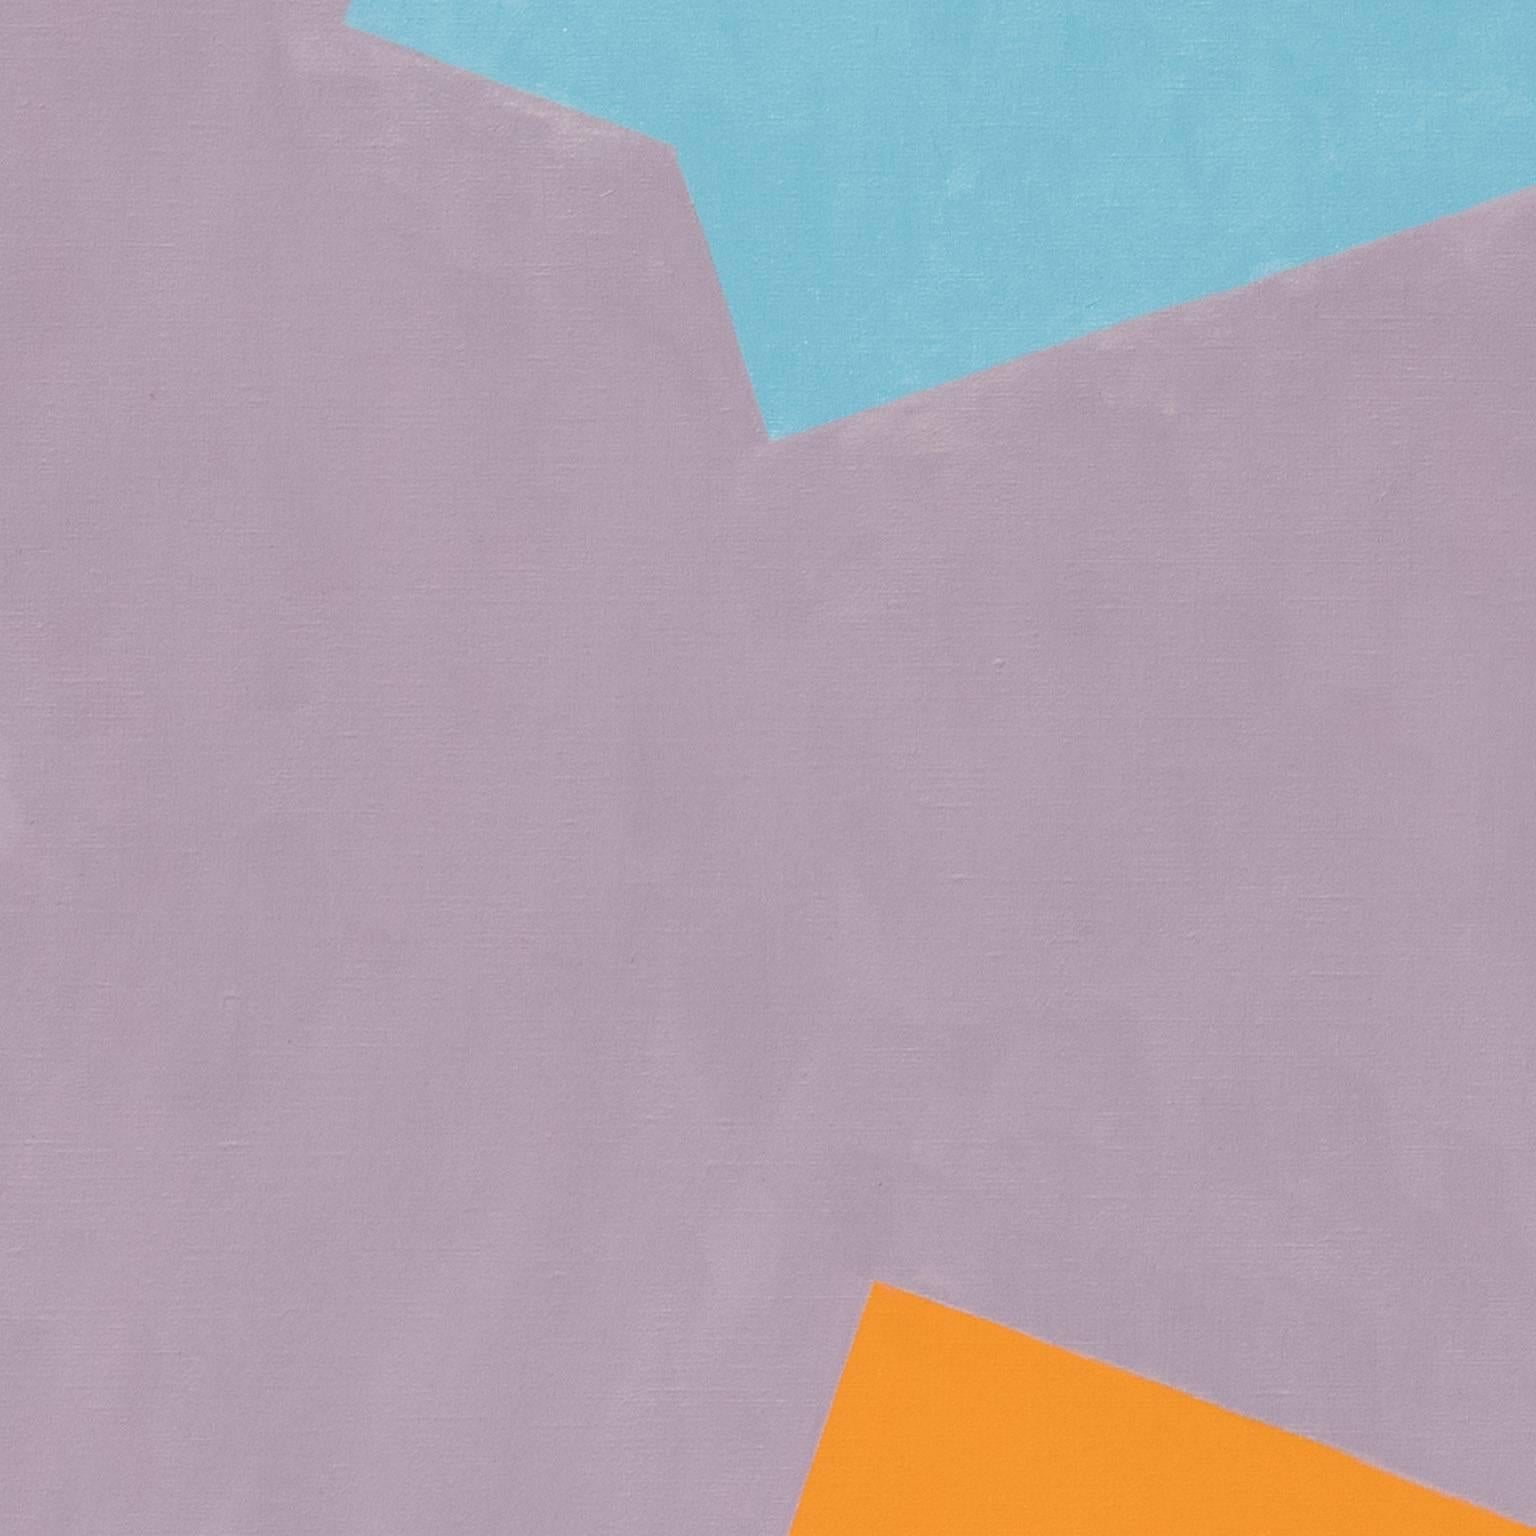 Martin Canin's Summer Fling is a 60 x 78 inch horizontal color-field oil painting from 1983. Color is freed from objective context and becomes the subject in itself.  The main color is a light purple field, with orange, green and blue rectangles